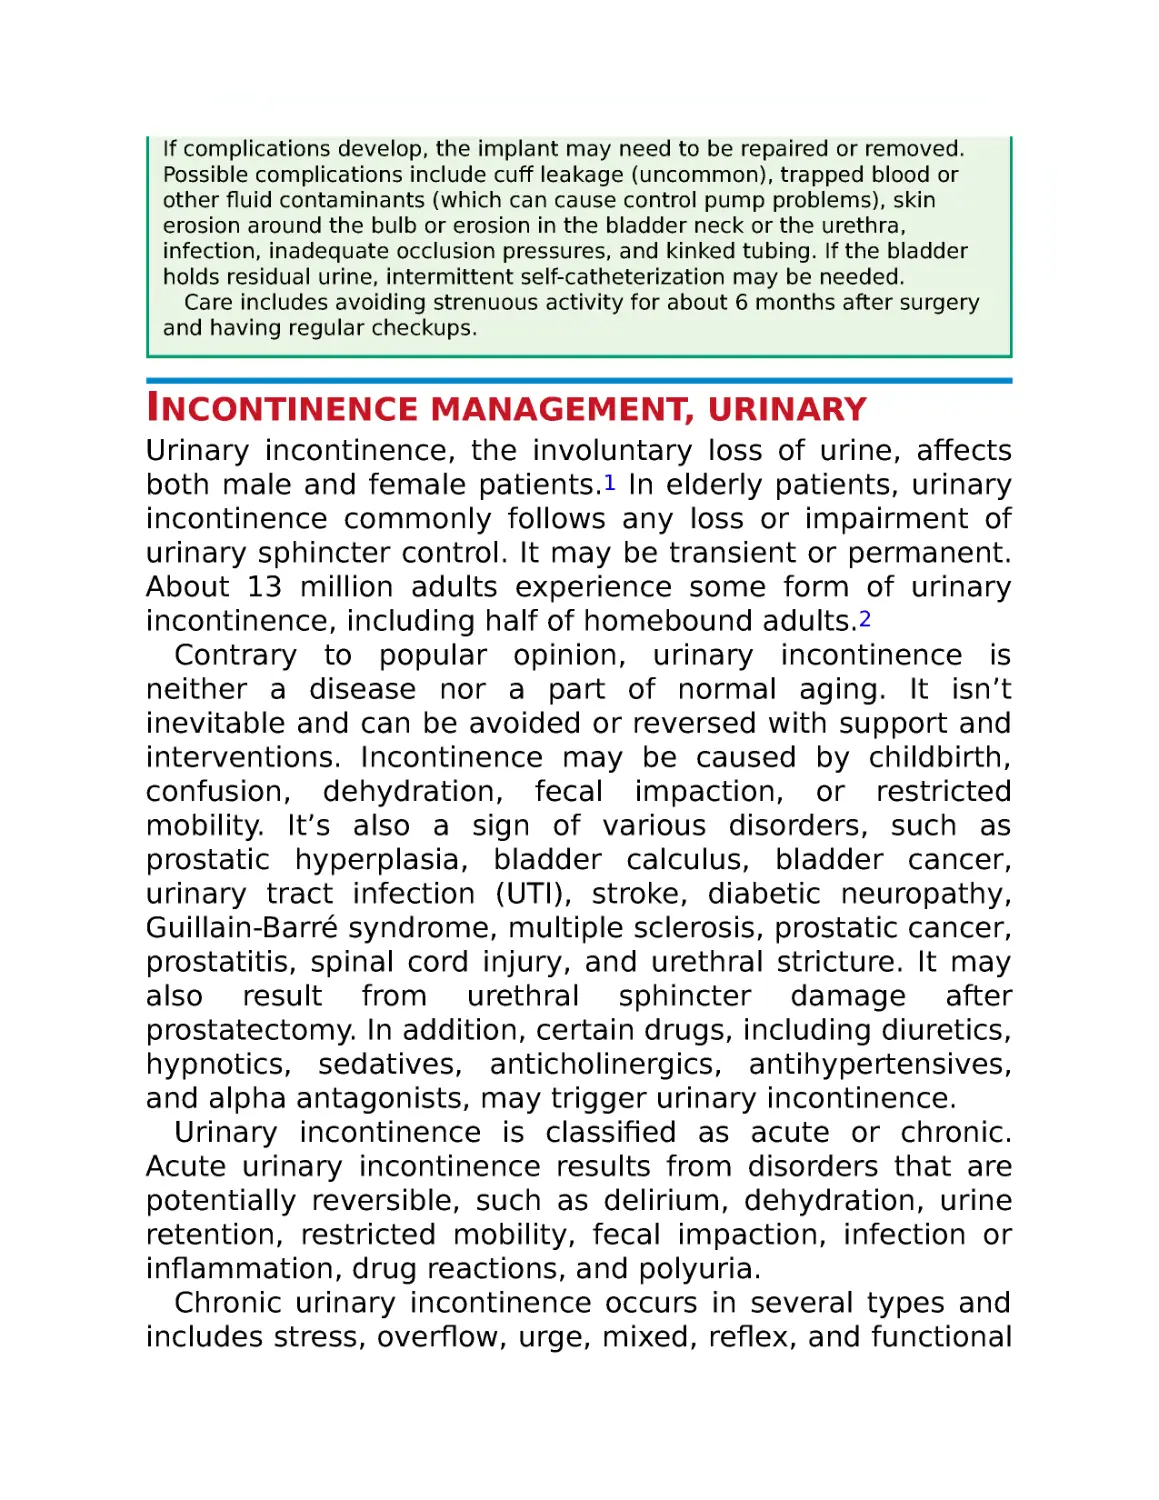 Incontinence management, urinary